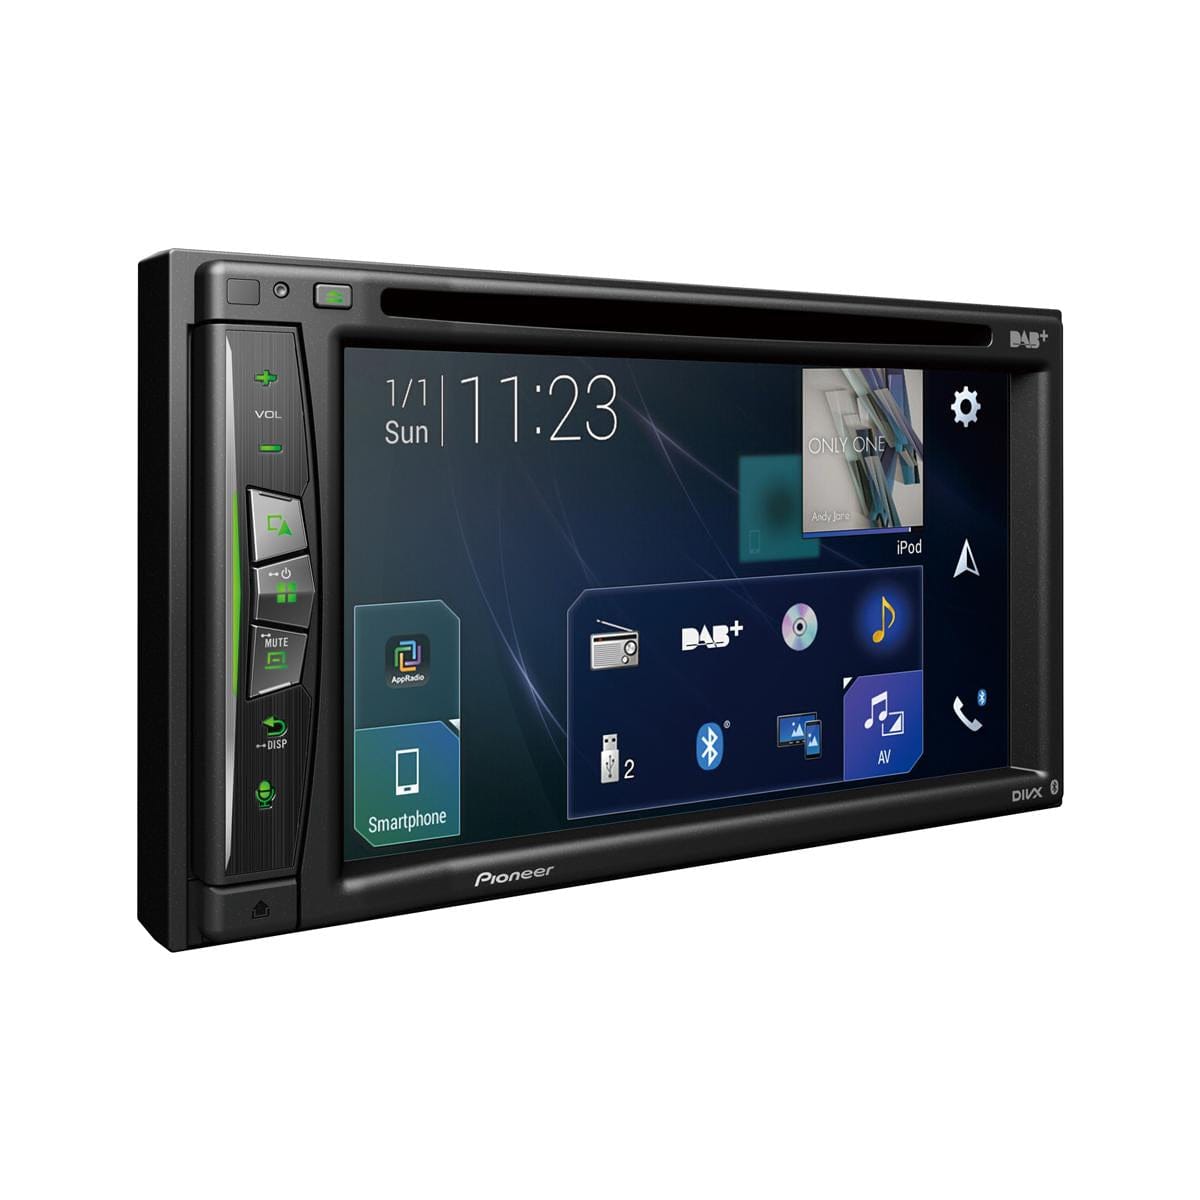 Pioneer Pioneer Pioneer AVIC-Z730DAB Wi-Fi enabled high-end built-in navigation AV system with 6.2-inch Touchscreen, Wireless Apple CarPlay, Waze, Bluetooth and DAB+